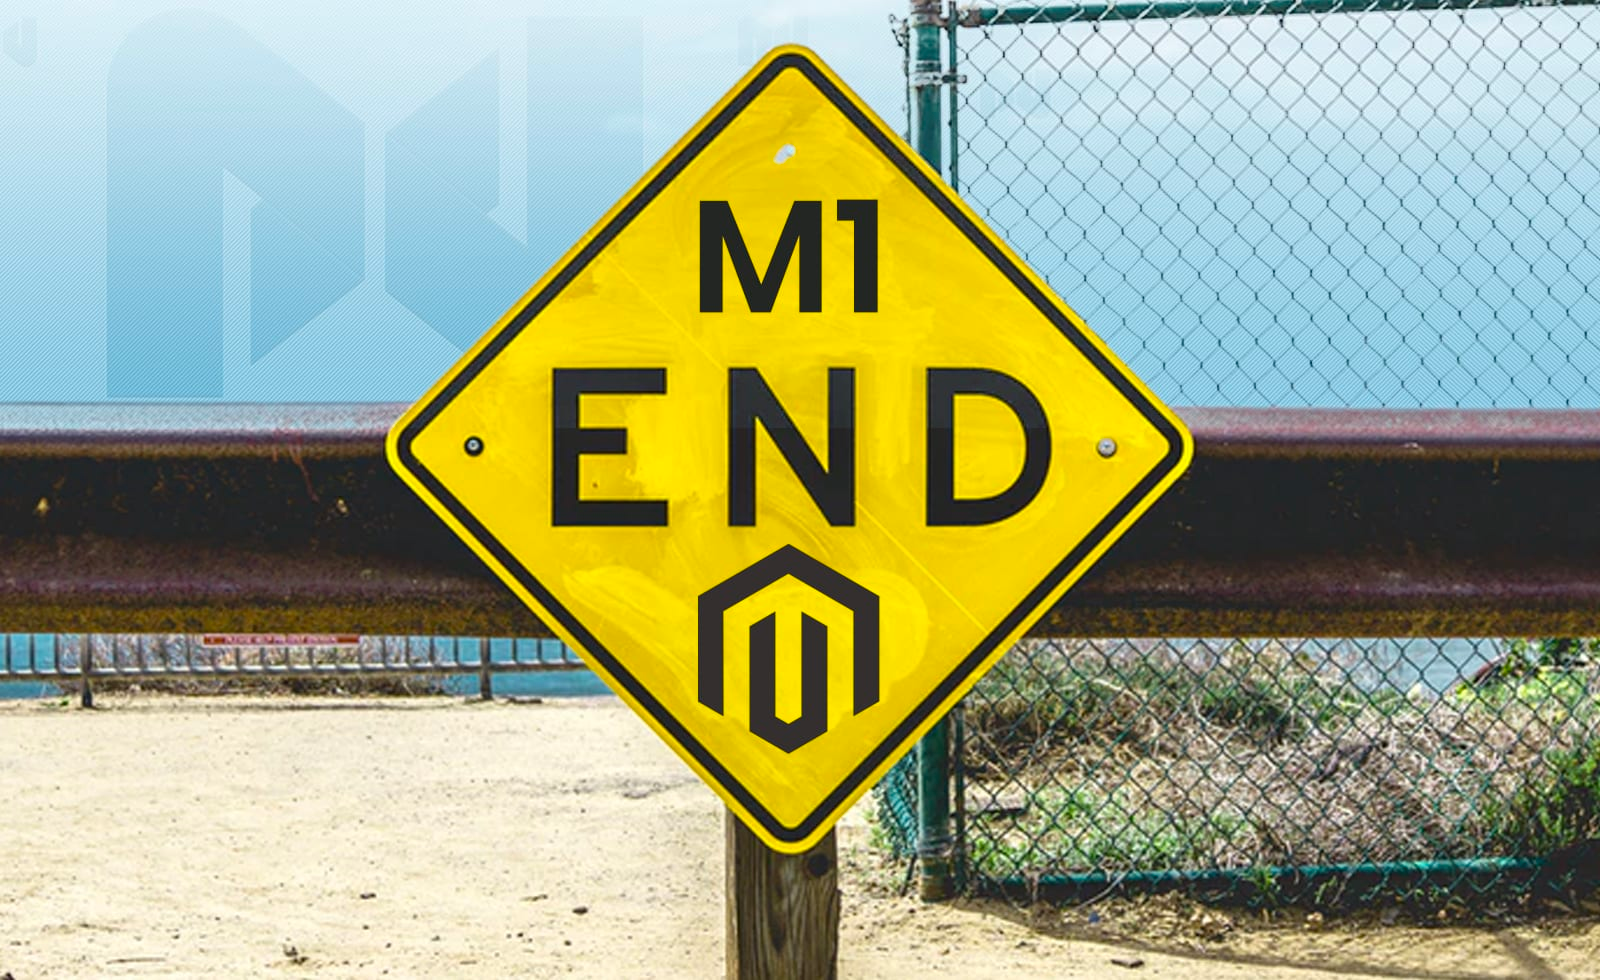 Magento 1 End of Life: What You Need to Know